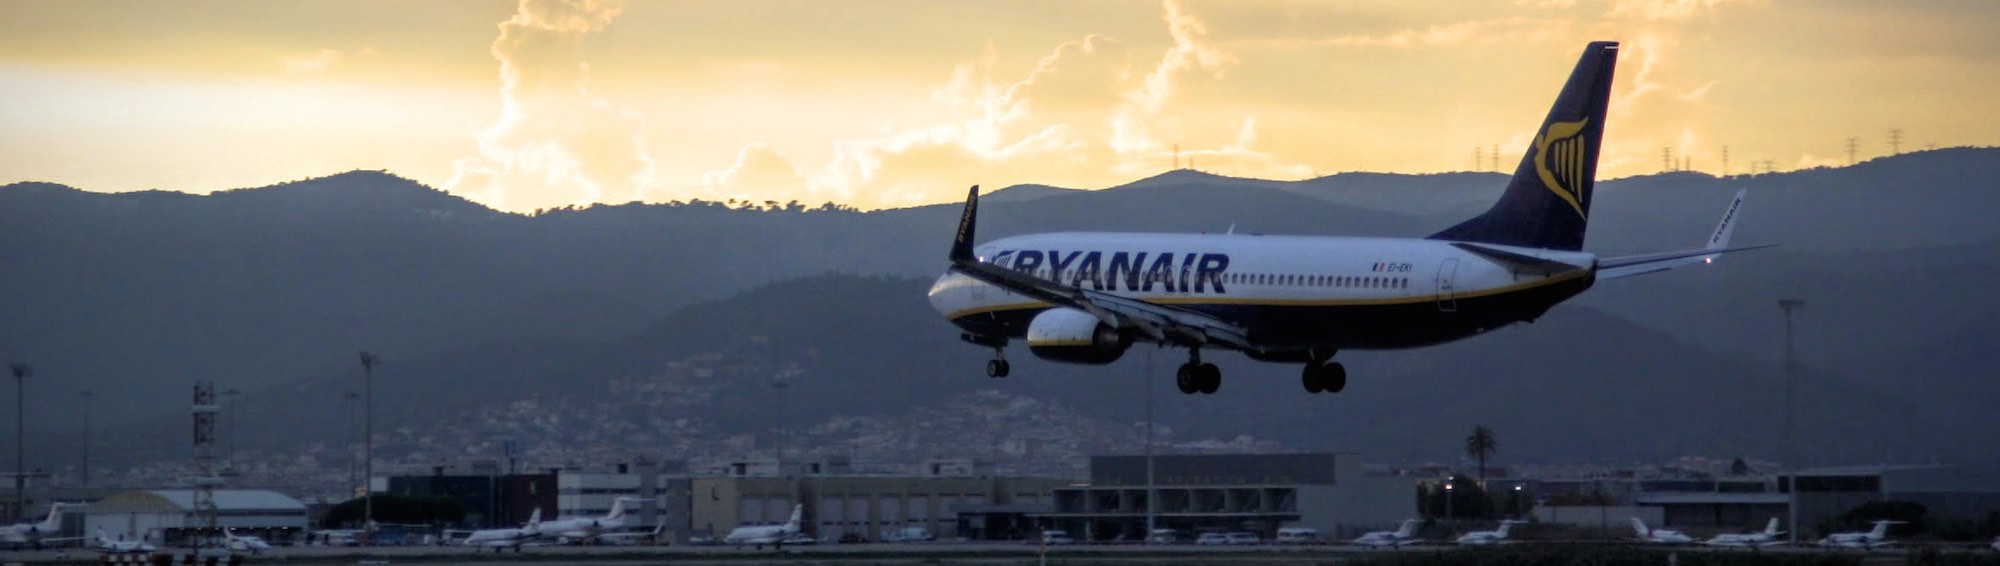 Best time to book flights for Helsinki (HEL) to Bergamo (BGY) flights with Ryanair at AirHint